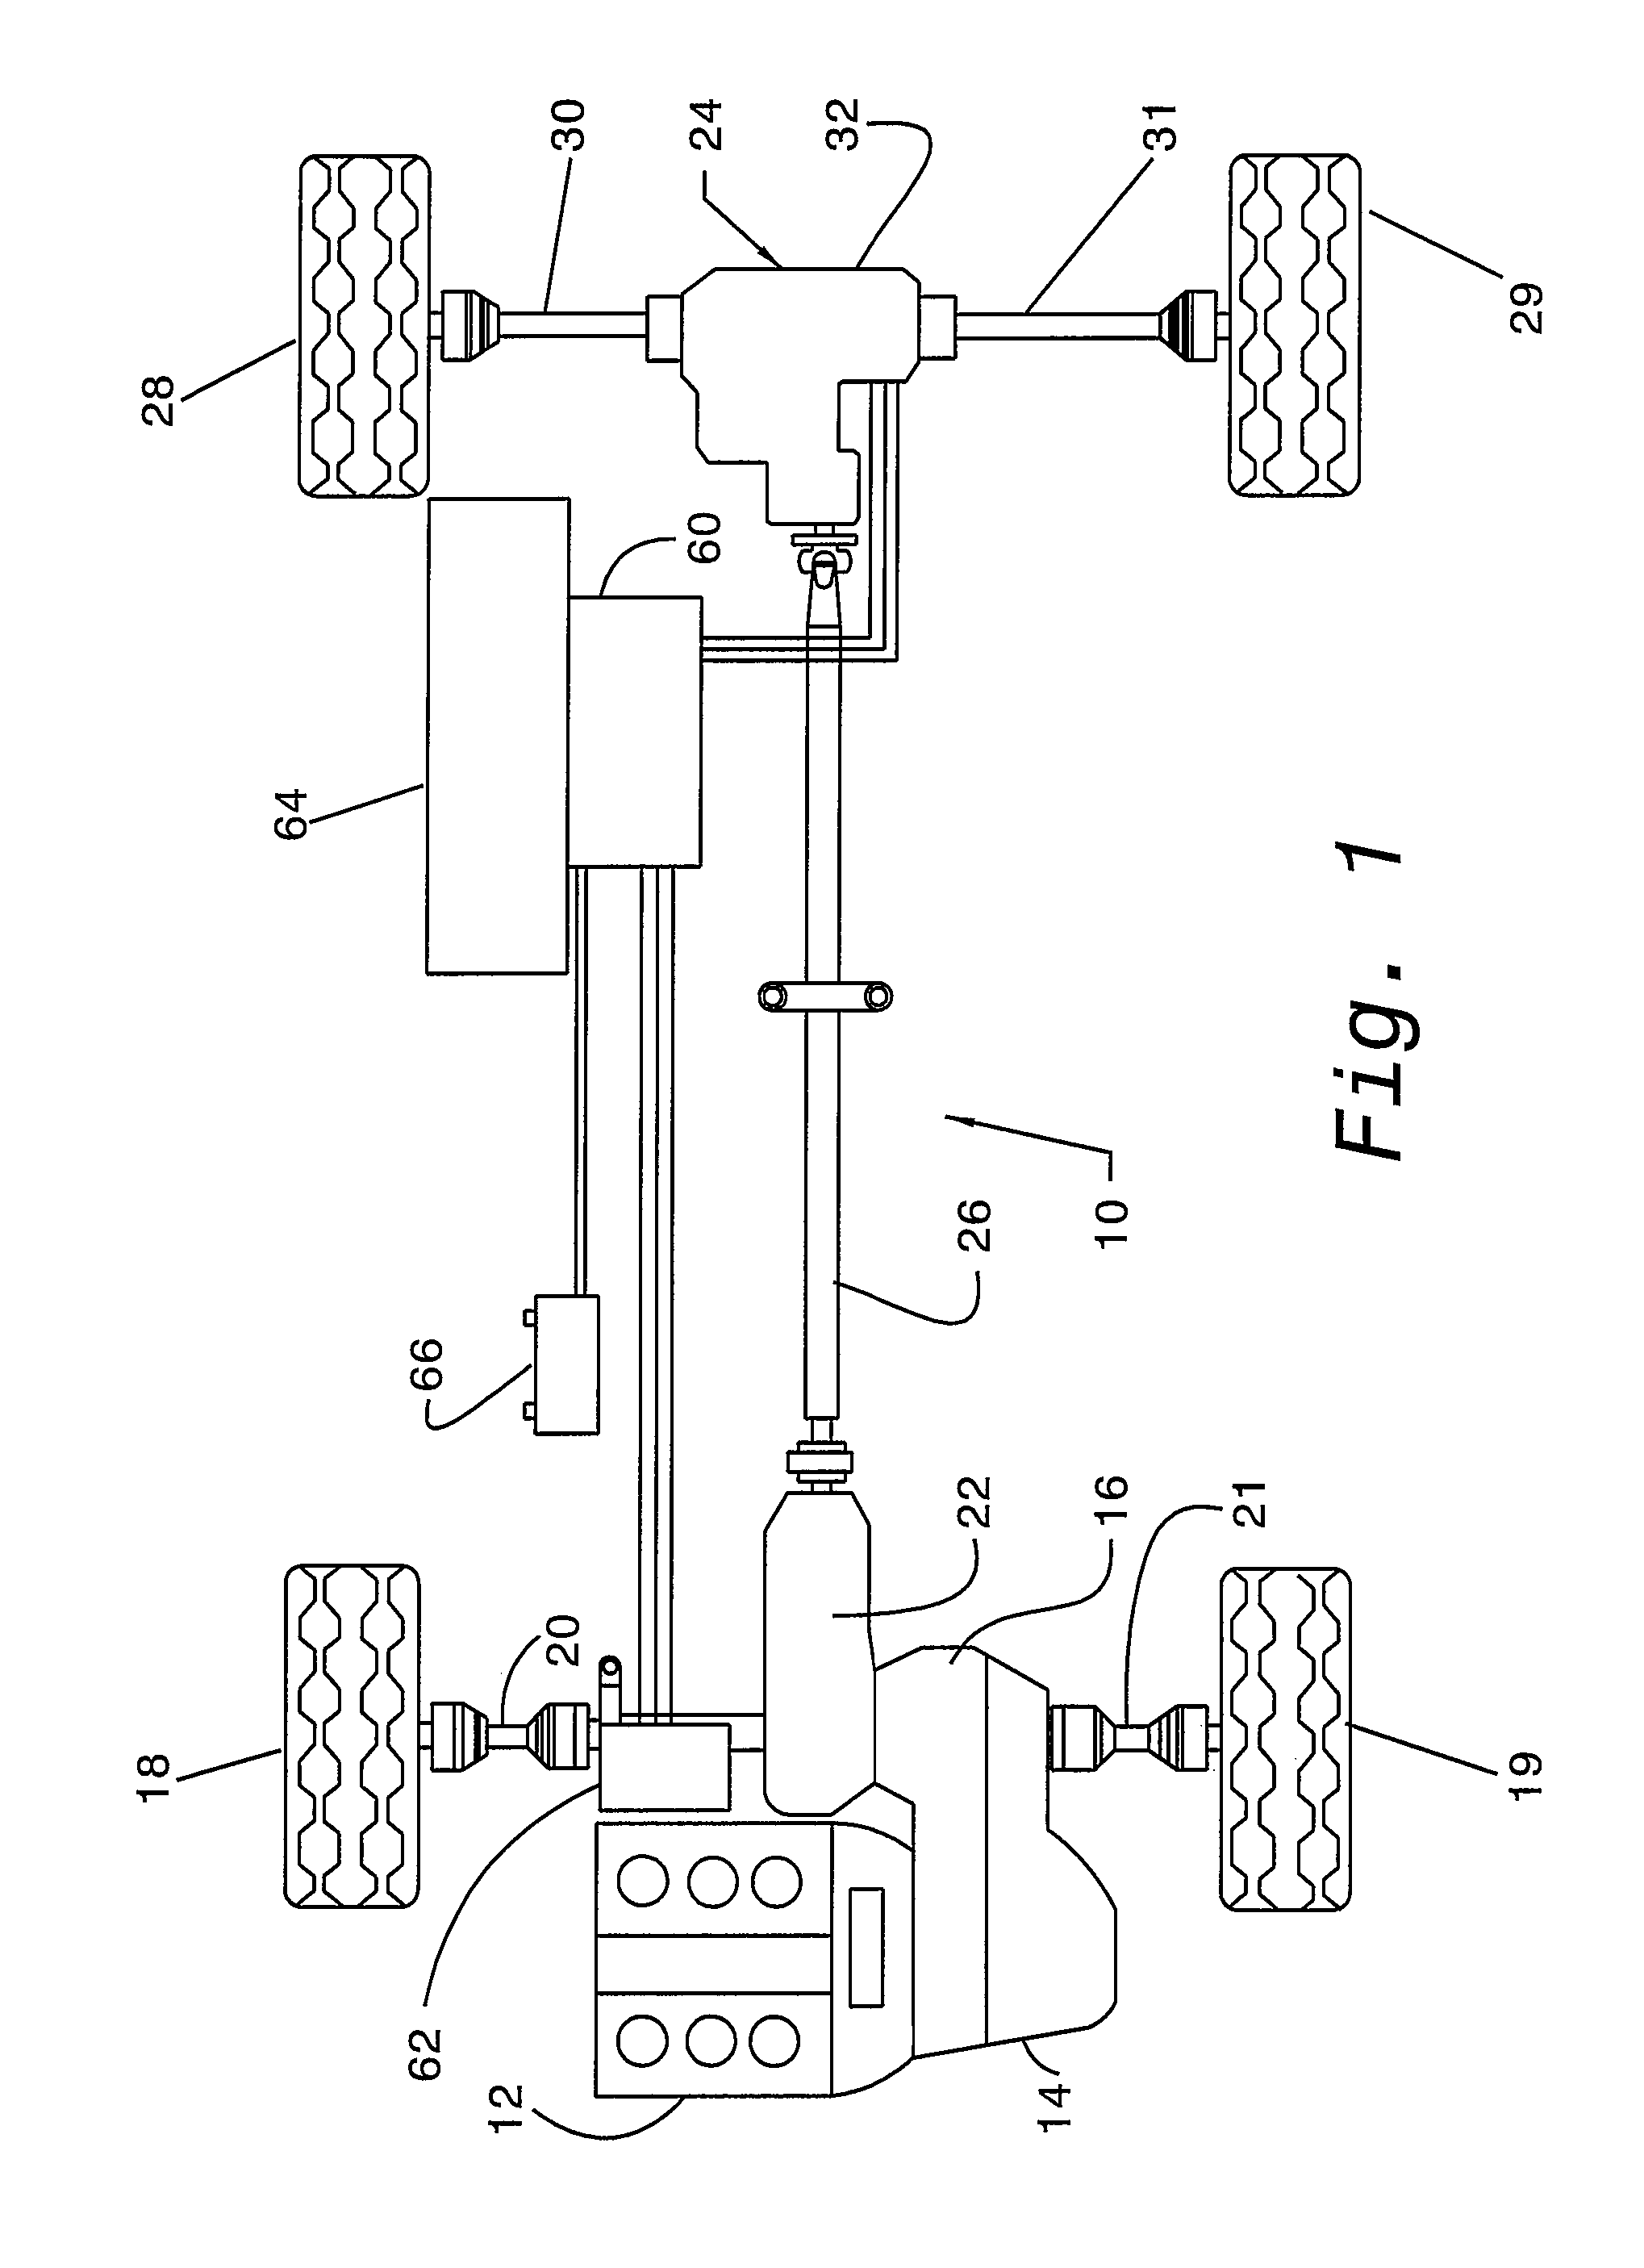 Axle drive unit for a hybrid electric vehicle